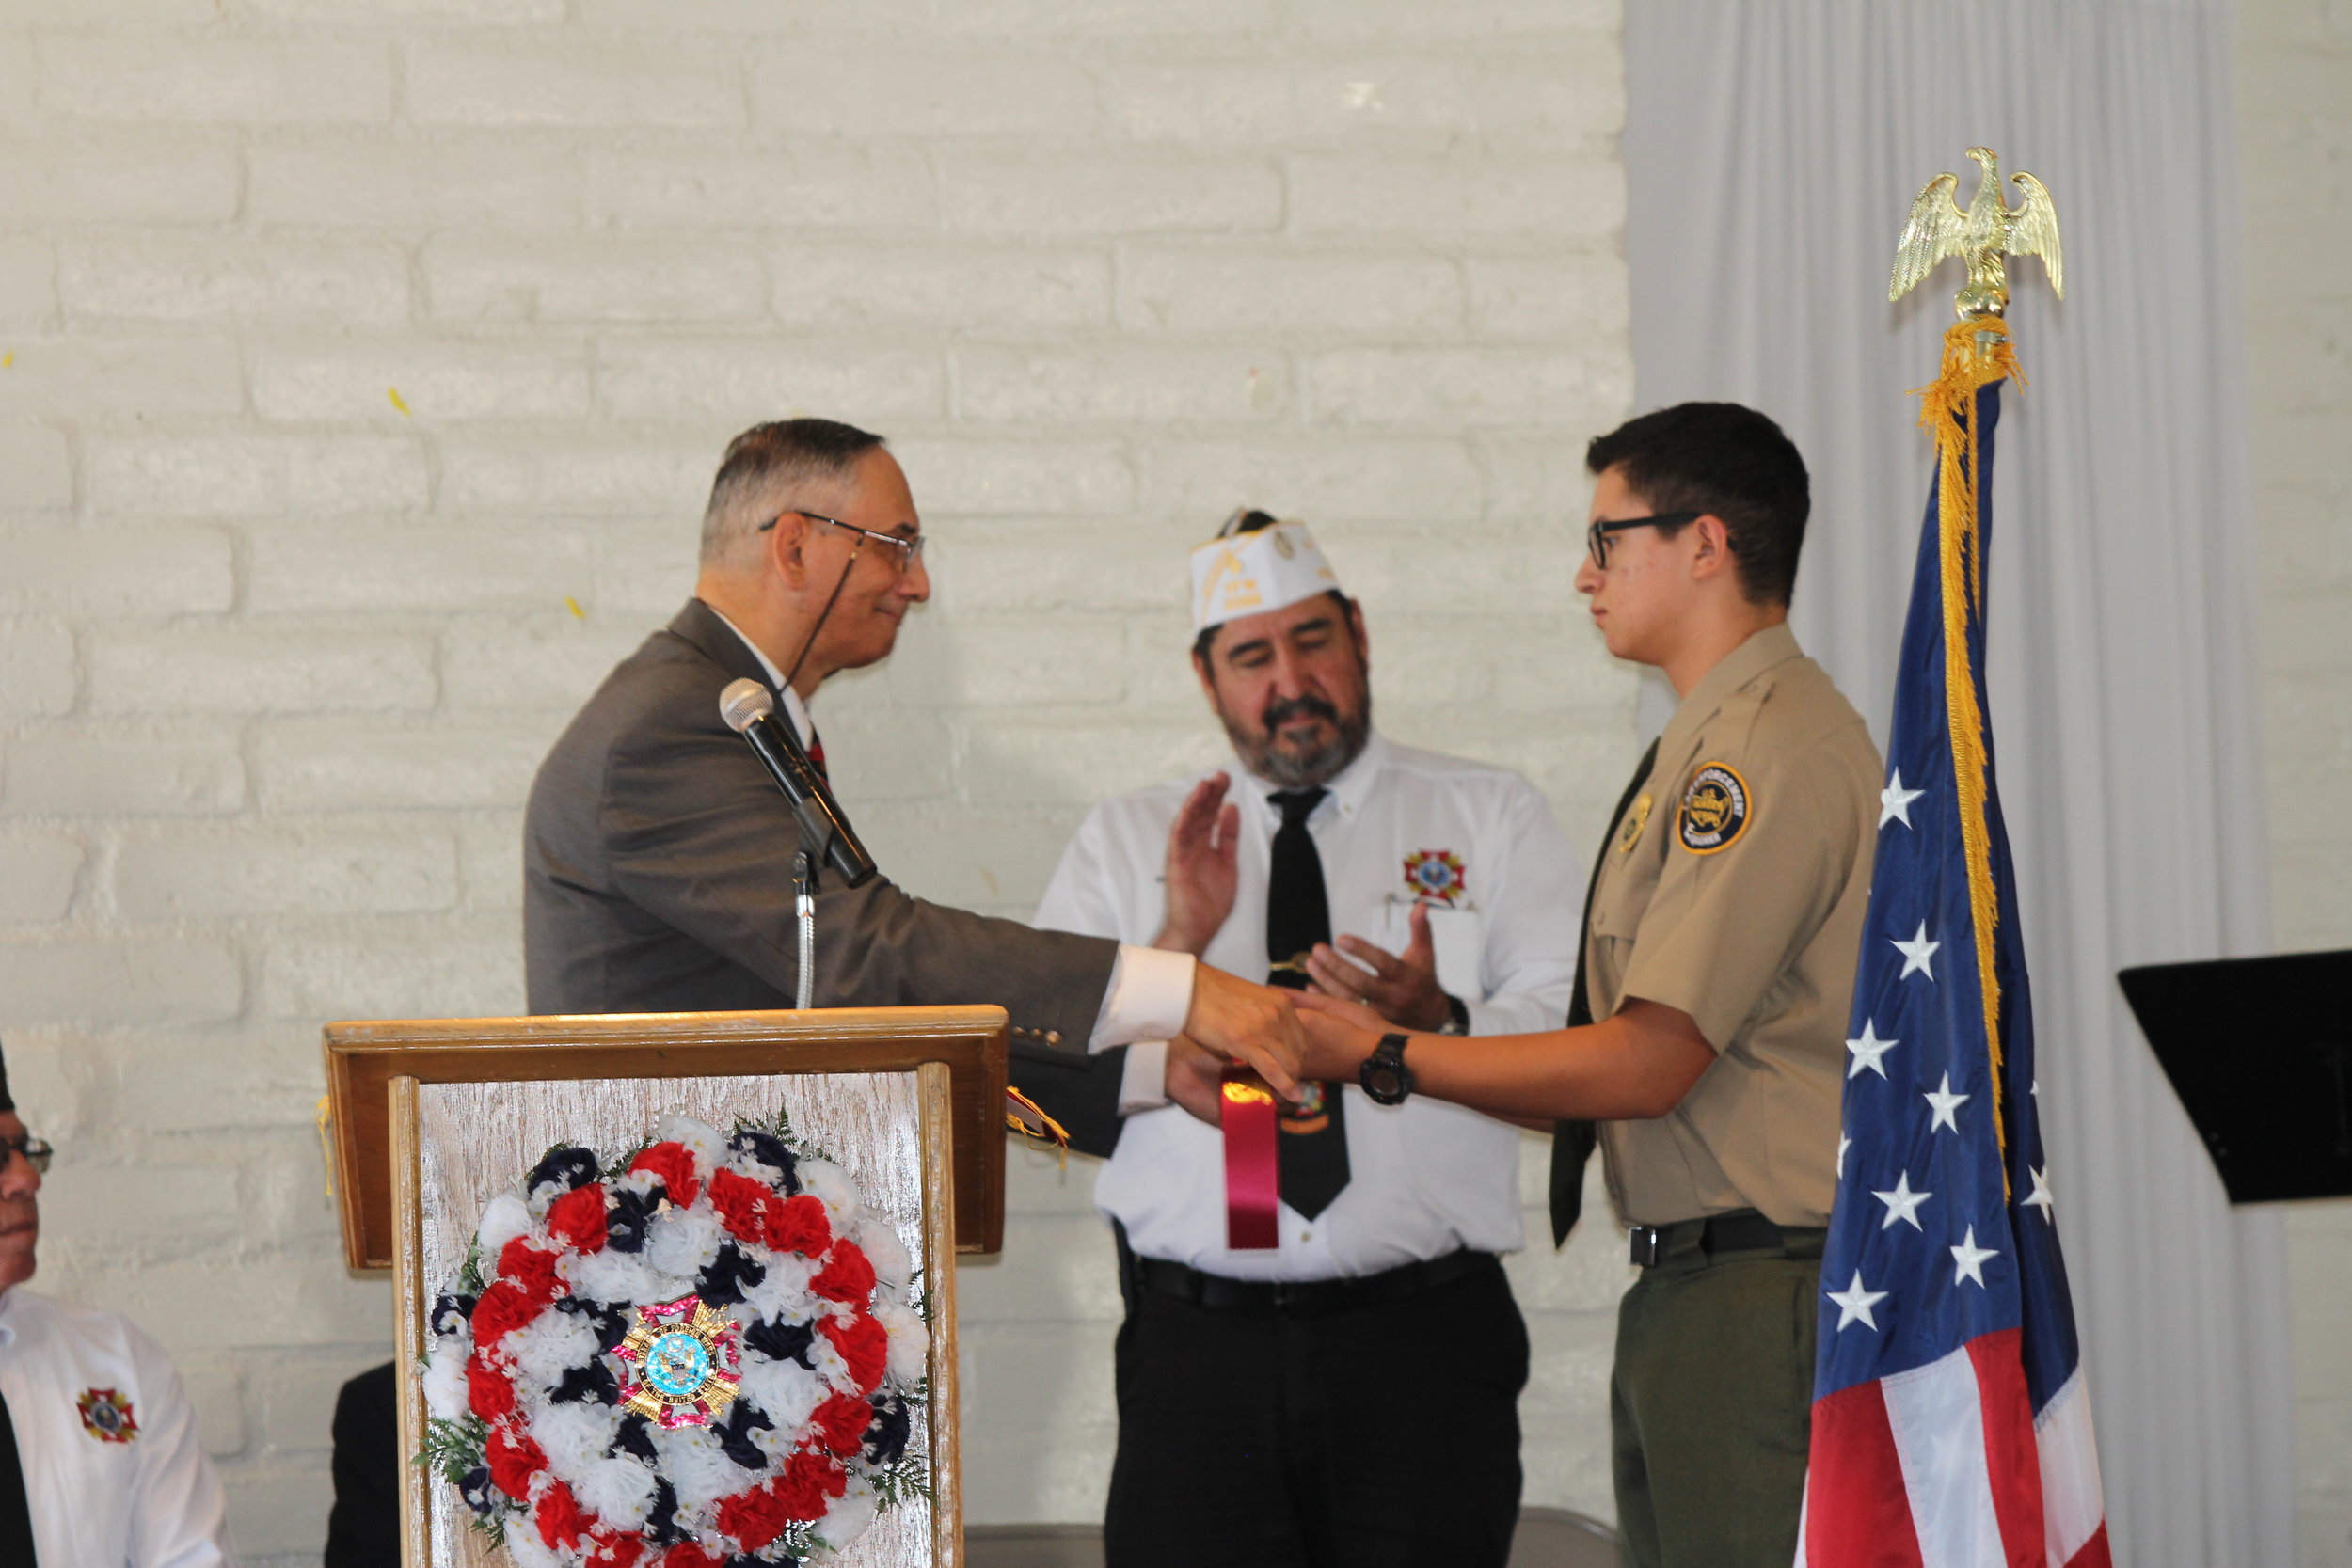 31st Massing of the Colors at the Nogales VFW